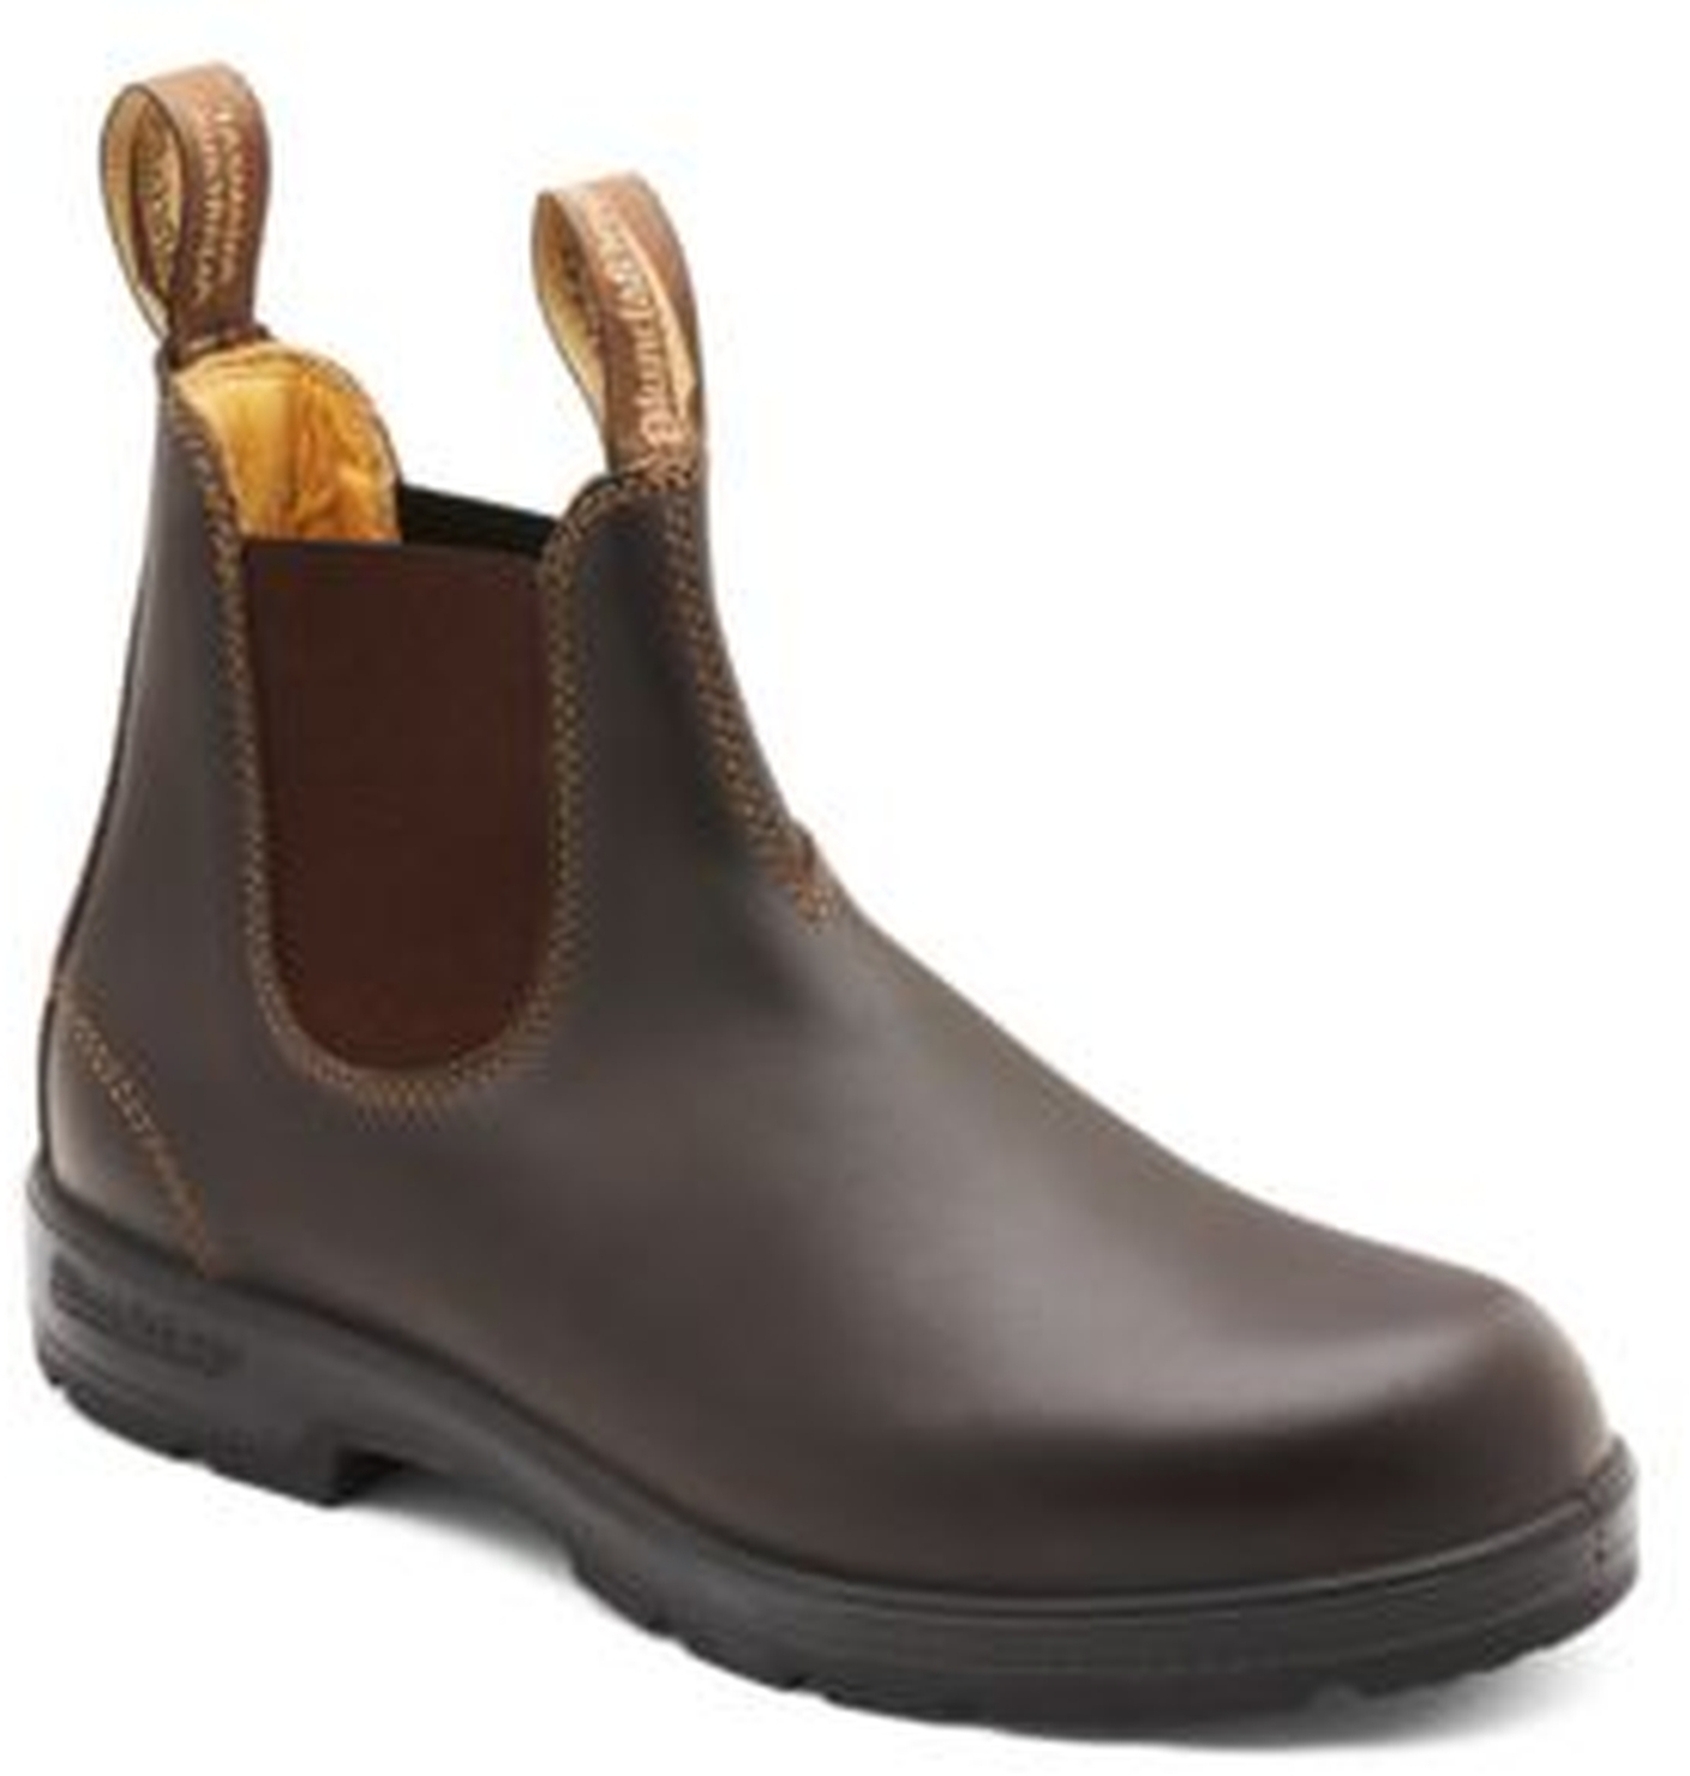 Blundstone 550 Walnut Brown Leather (550 Series) Calf leather